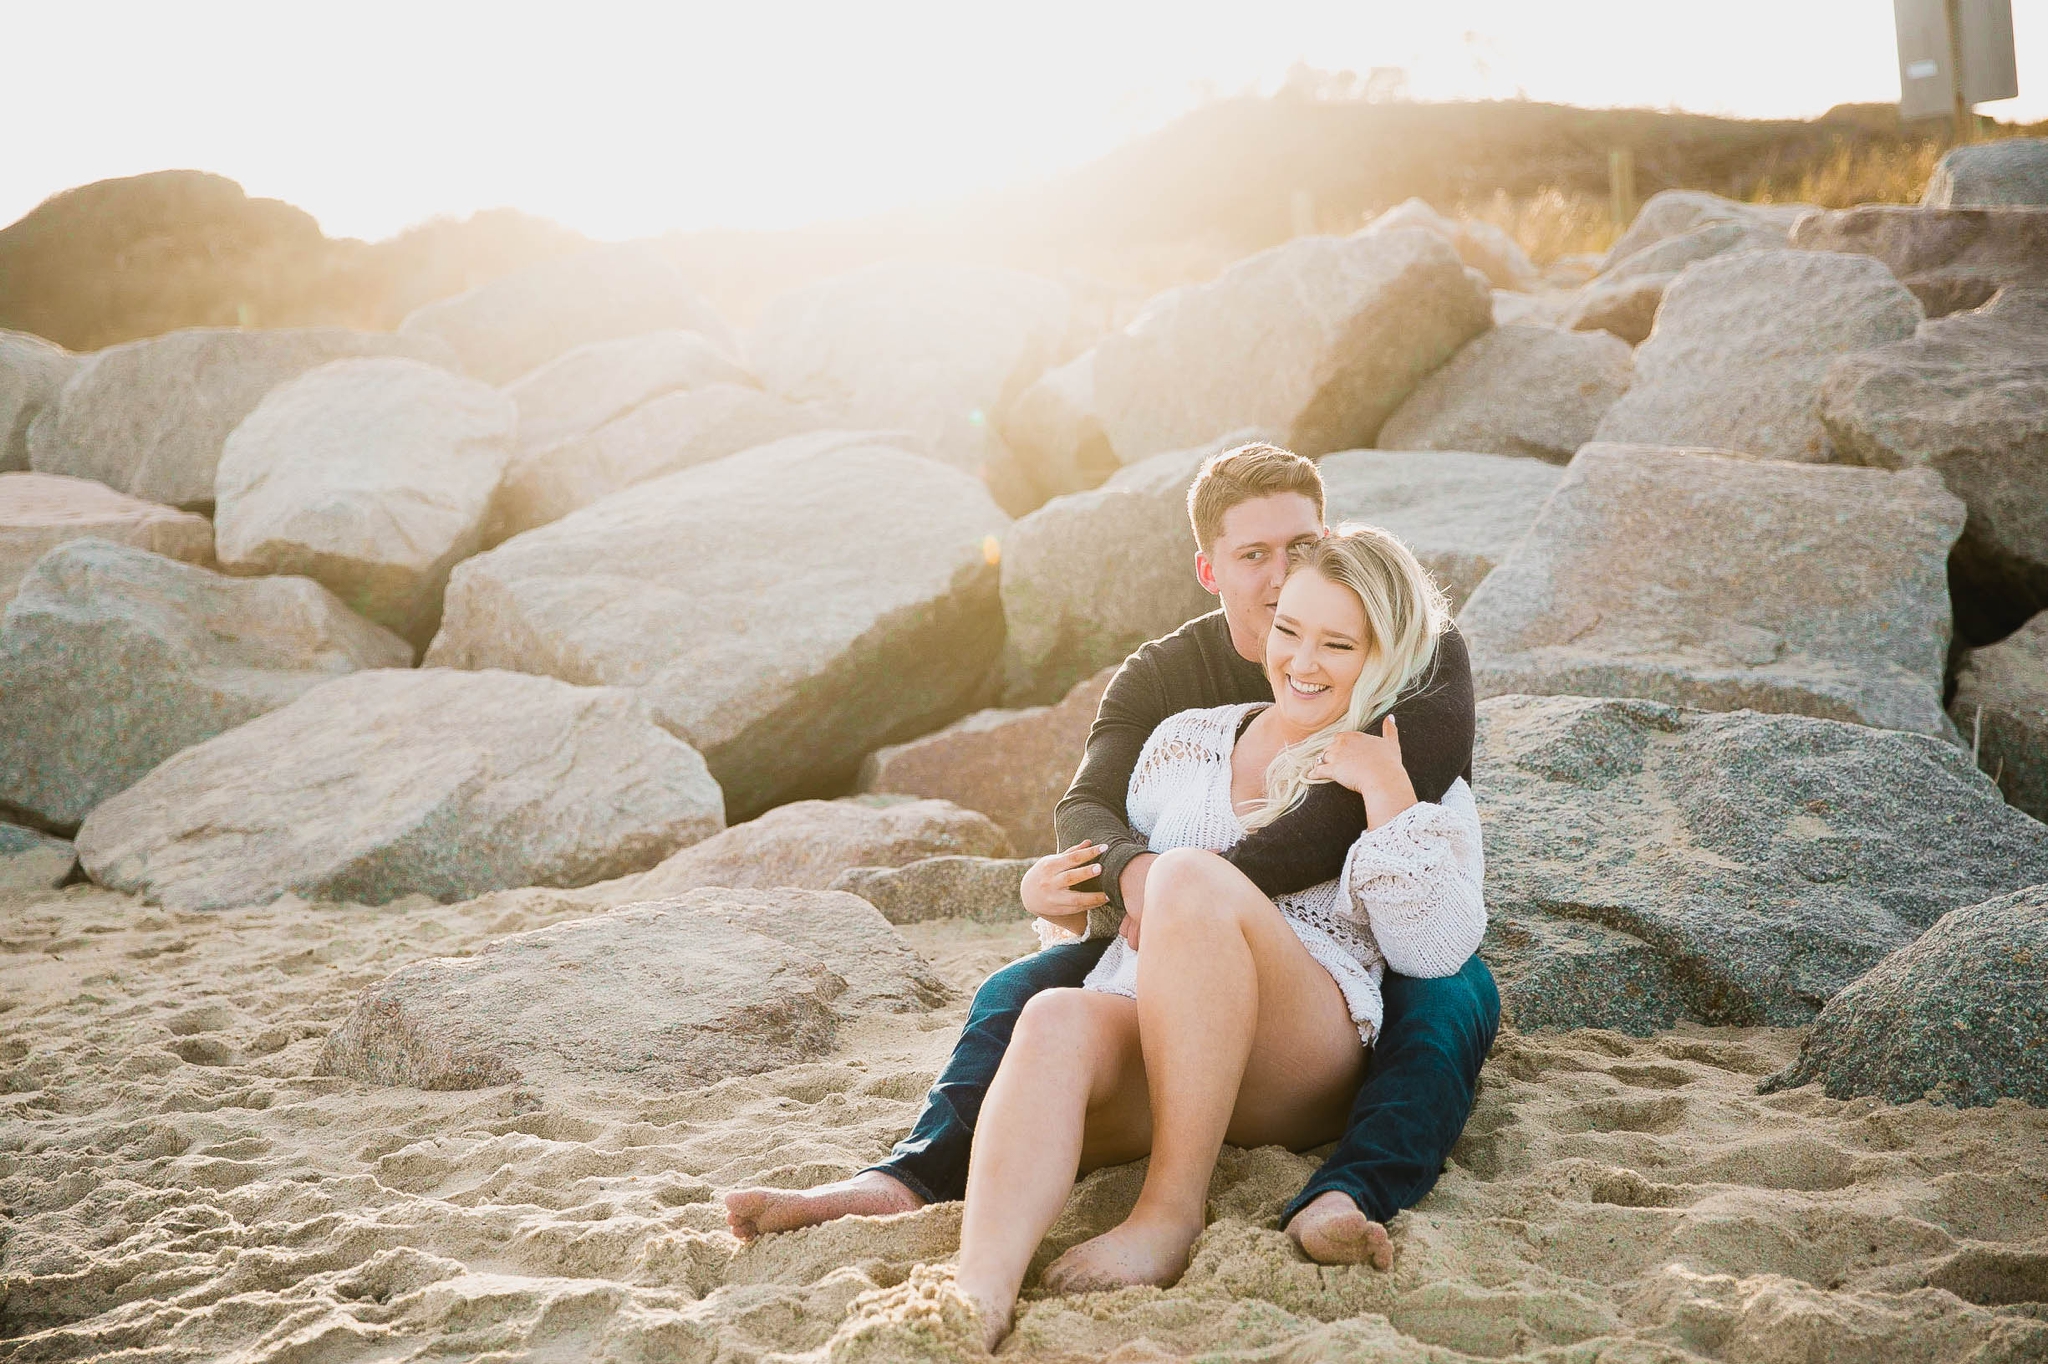  couple looking at the ocean while sitting on a sandy beach at sunset with golden hour light shining onto them - girl wearing ripped jeans shorts and a white free people sweater - Casual Beach Engagement Photography Session - Honolulu Oahu Hawaii Wed